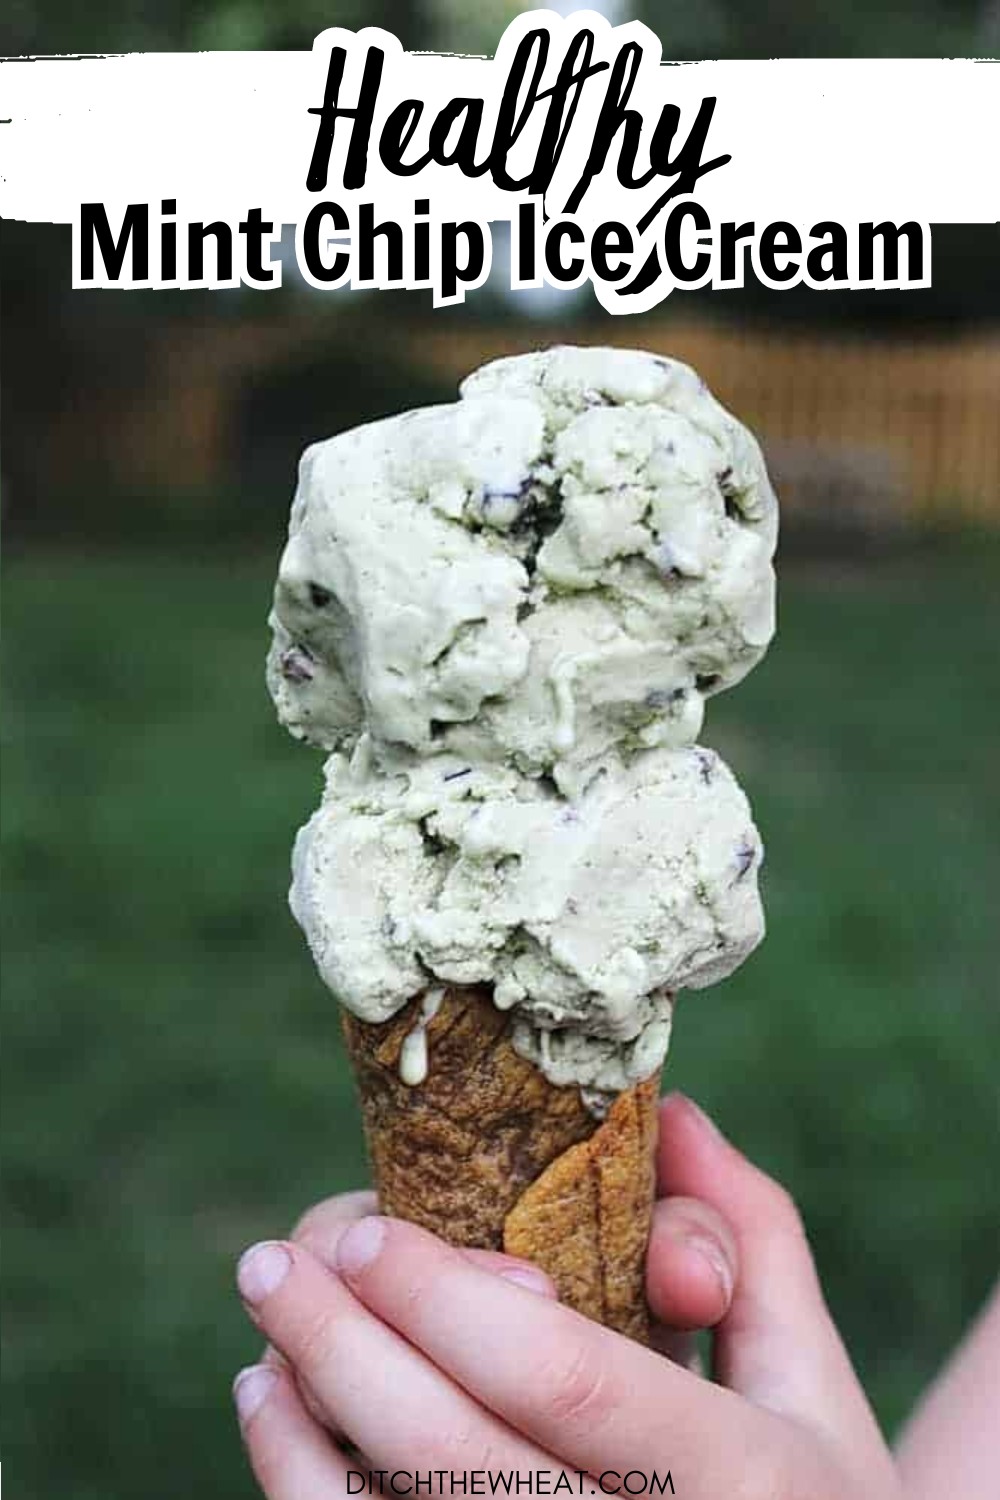 A child's hand is holding an ice cream cone with two scoops of dairy-free mint Chip Ice cream.